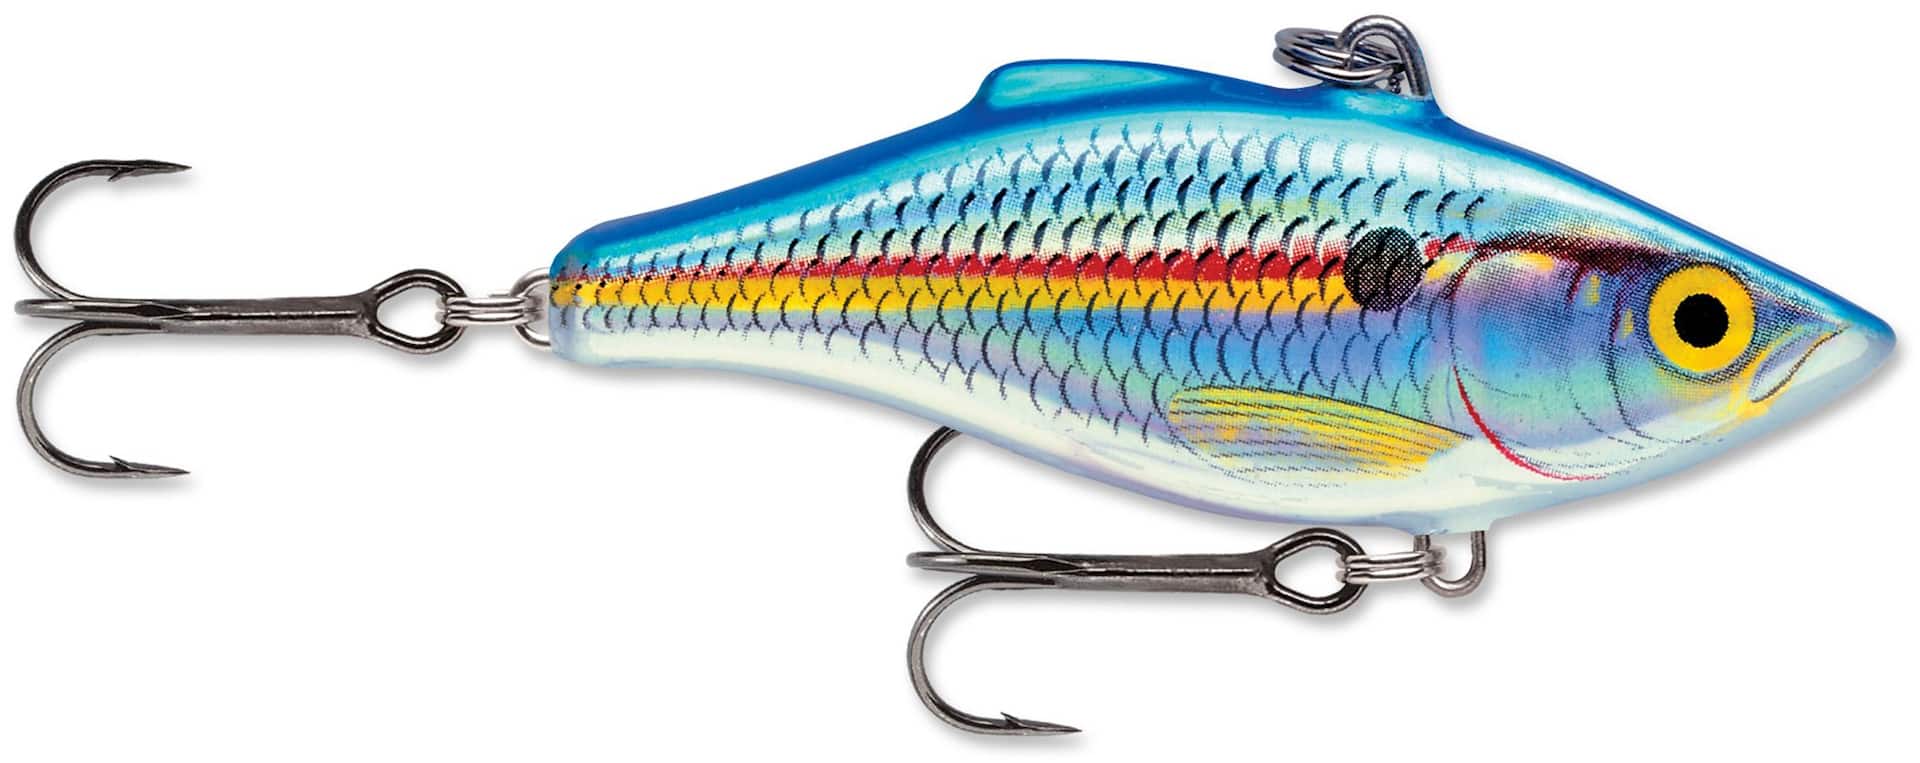 https://media-www.canadiantire.ca/product/playing/fishing/fishing-lures/1780670/rapala-rattlin-rapala-holo-blue-shad-07-c8ad4922-0b59-43a0-a23f-74376a019c12-jpgrendition.jpg